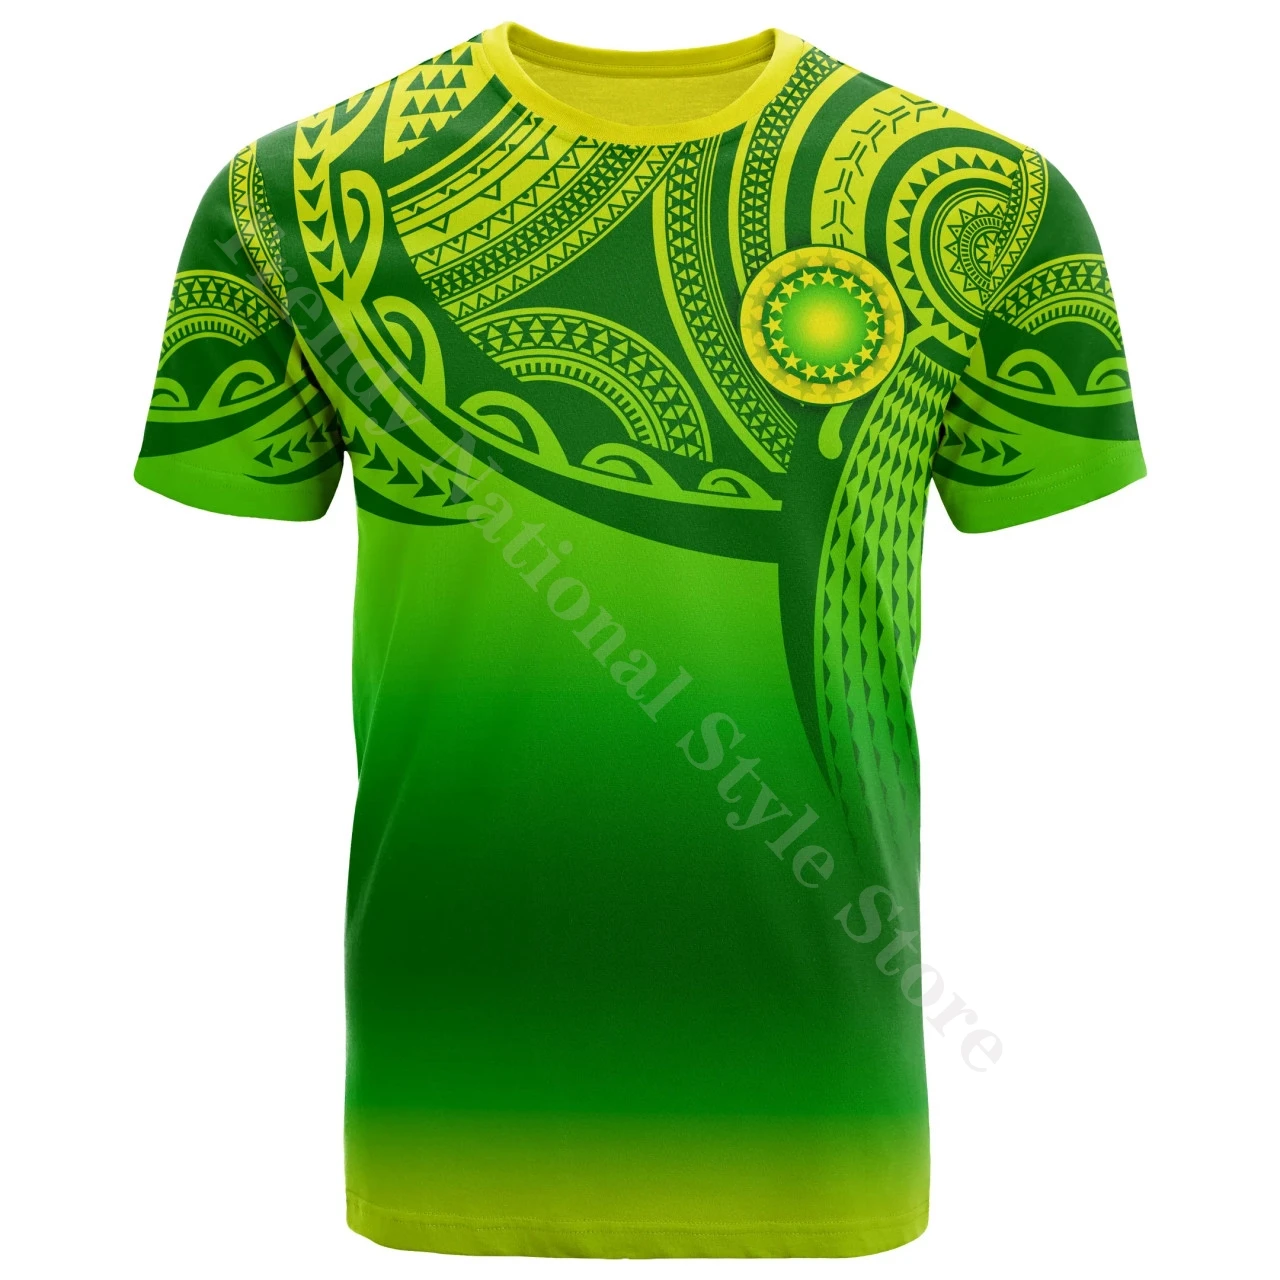 

2023 New Printed Casual Sweatshirt Cook Islands Polynesian T-Shirt - Tattoo Graphic Tops for Men and Women